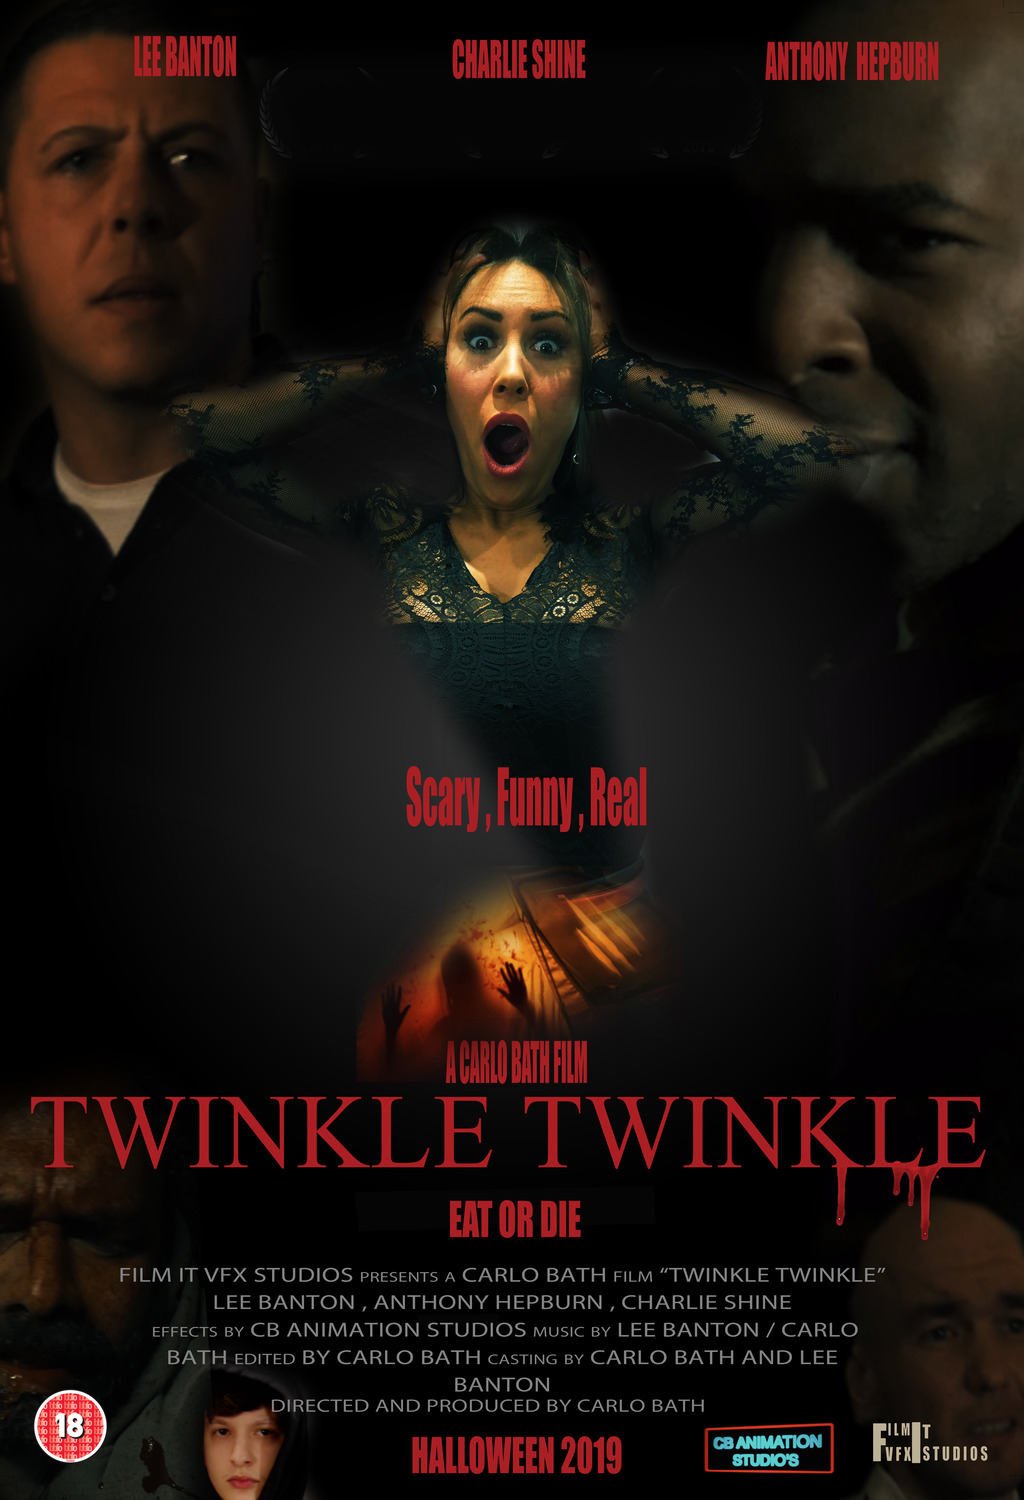 Extra Large Movie Poster Image for Twinkle Twinkle 